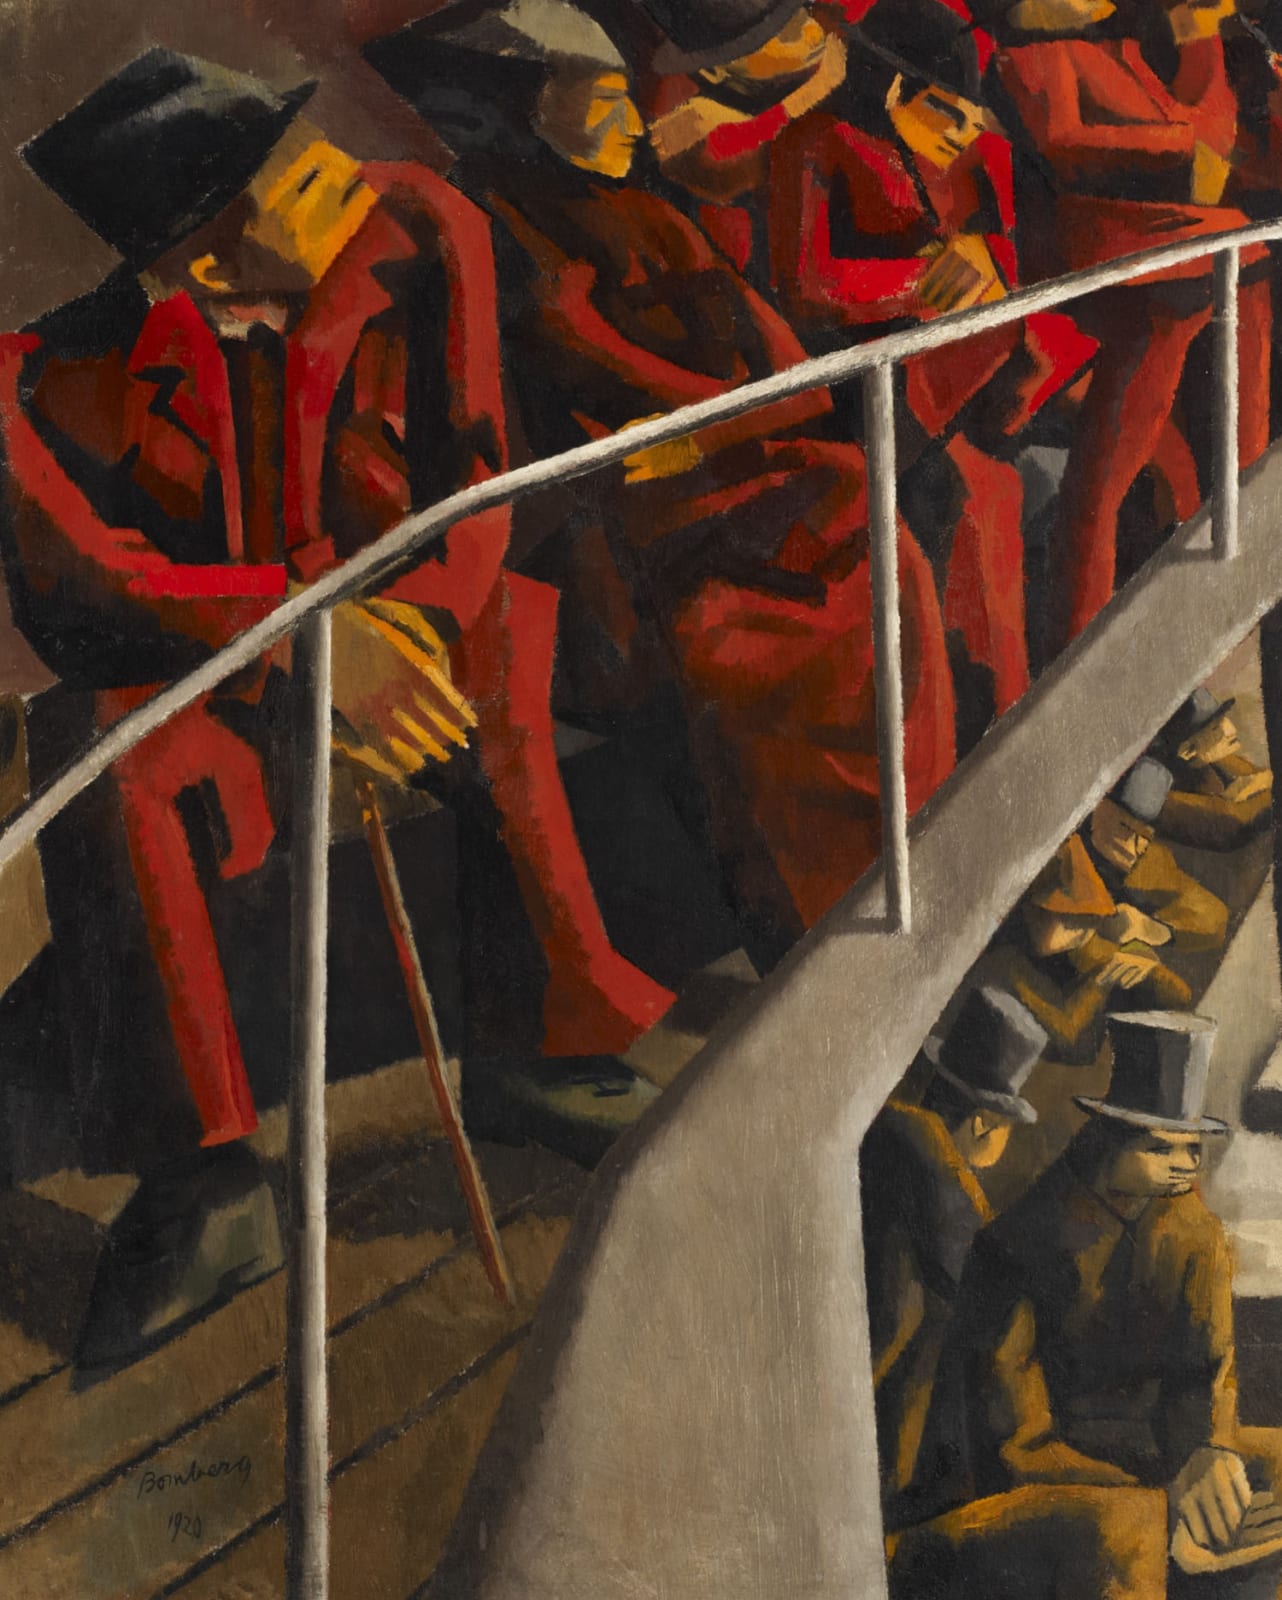 David Bomberg (1890-1957) Ghetto Theatre 1920 Oil on canvas 74.4 × 62 cm Ben Uri Collection © Courtesy of David Bomberg estate To see and discover more about this artist click here